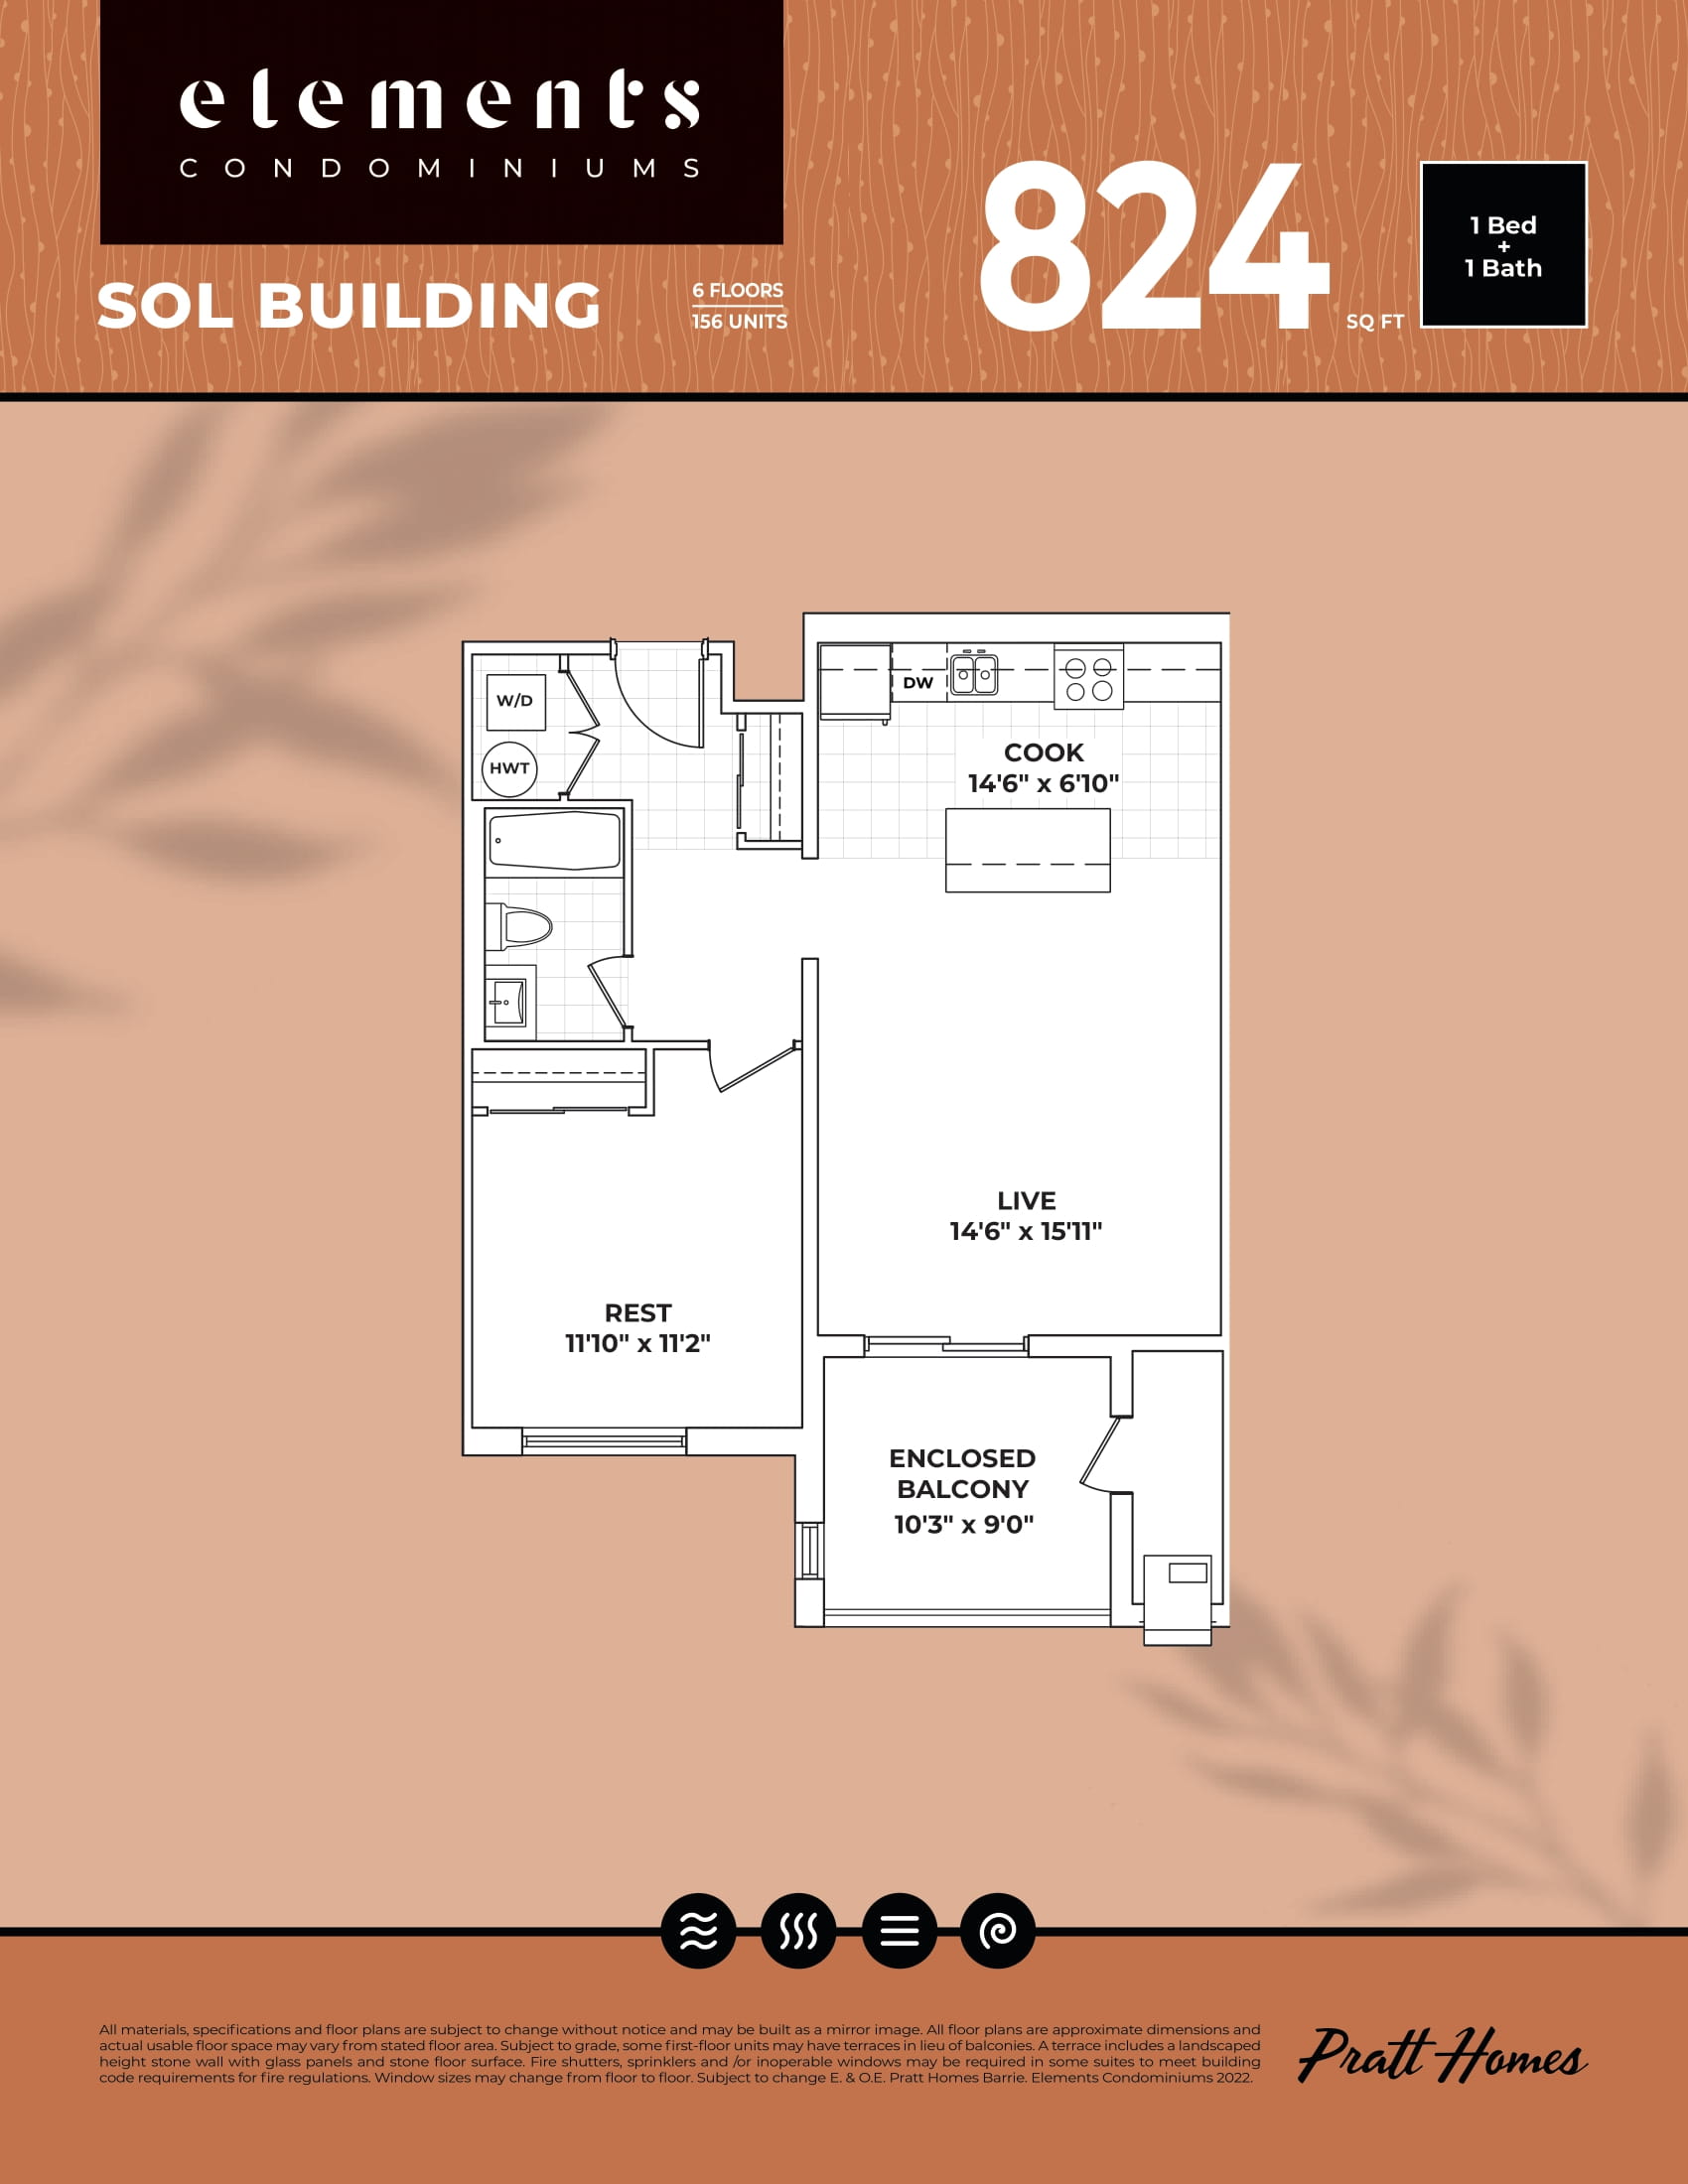  Floor Plan of Elements Condominiums with undefined beds